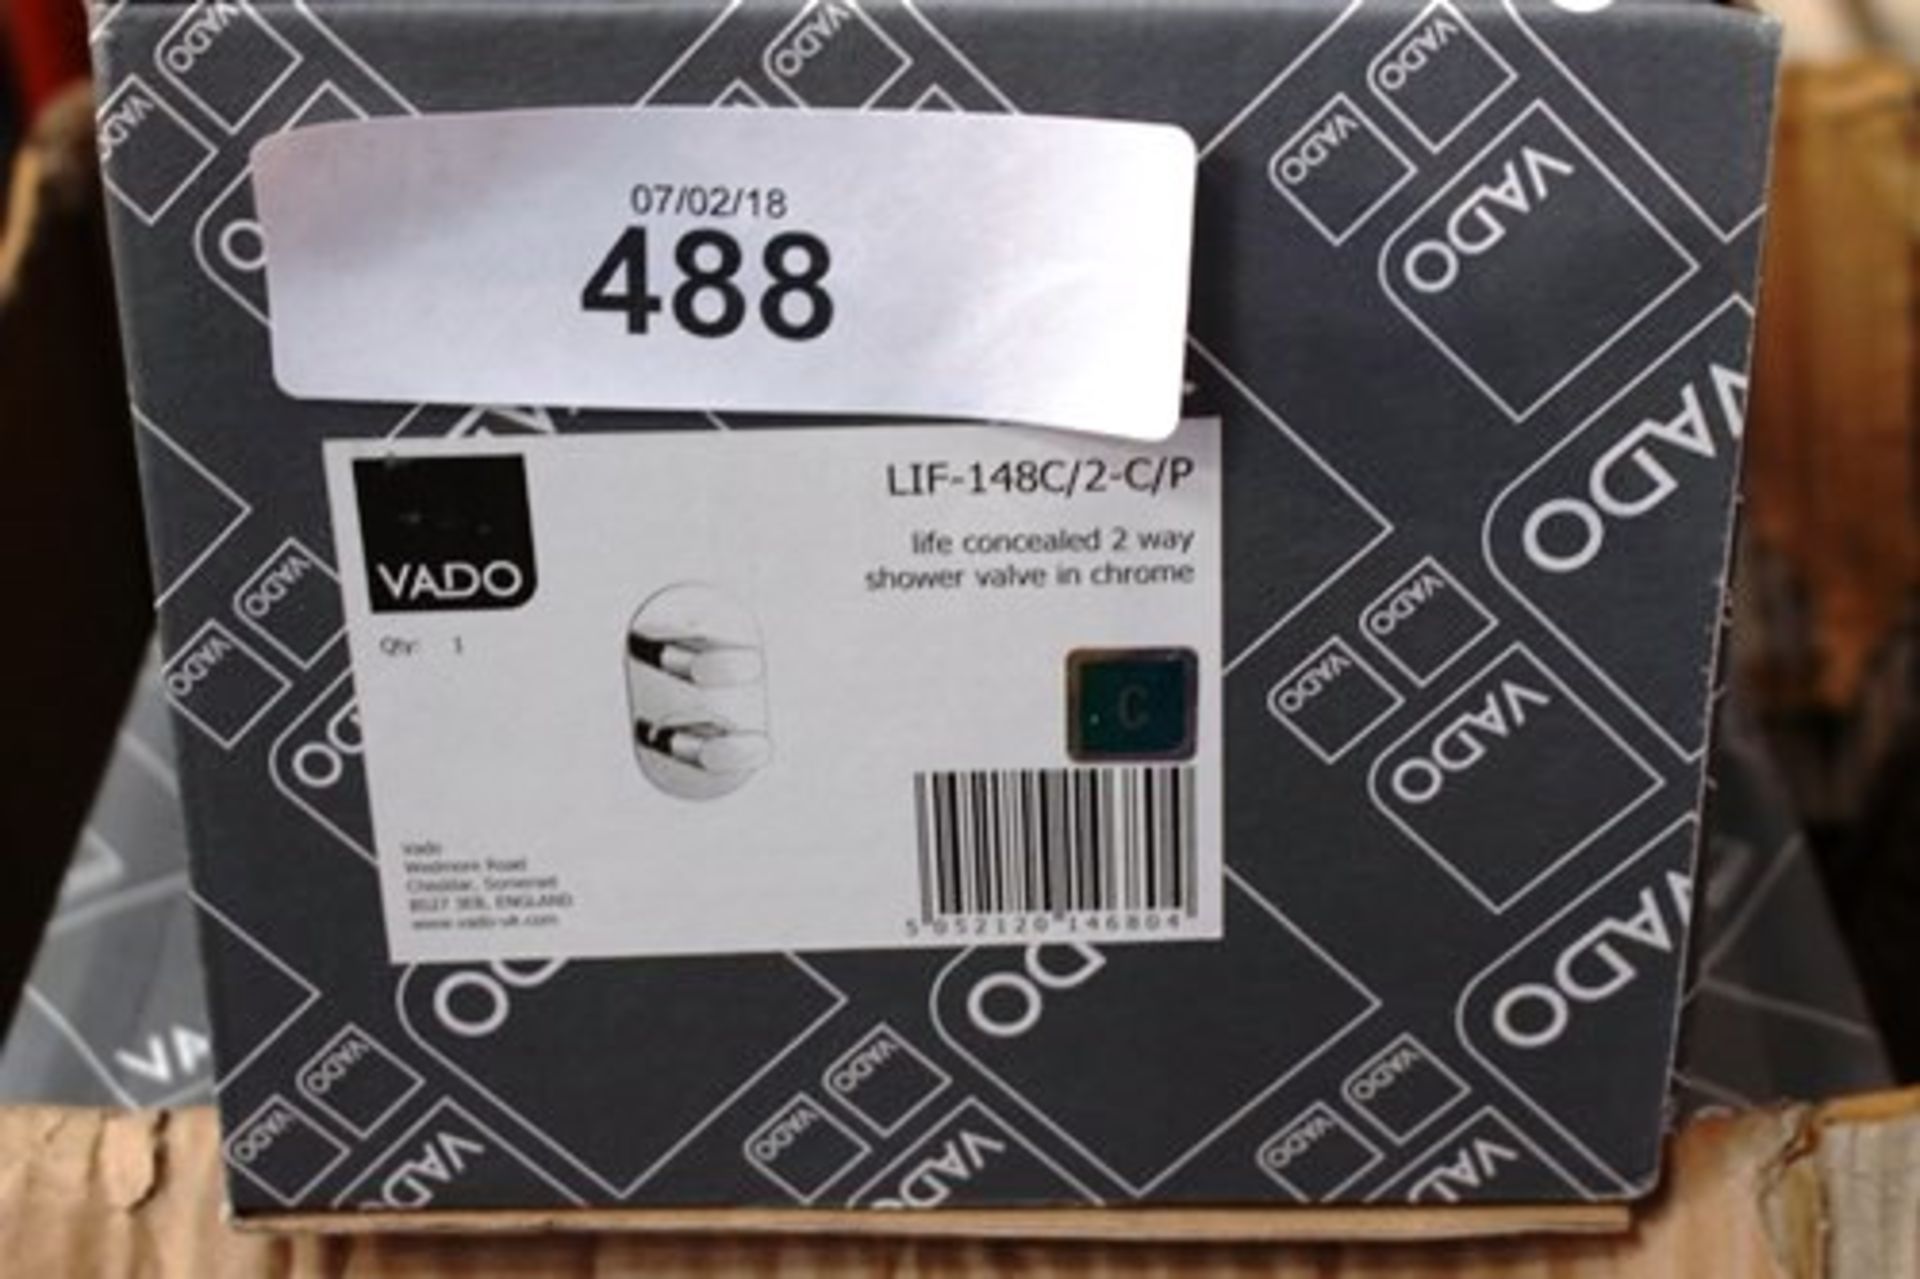 1 x Vado Life concealed 2-way shower valve in chrome, REF: LIF-148C/2-CIP, RRP £325.00 - New in